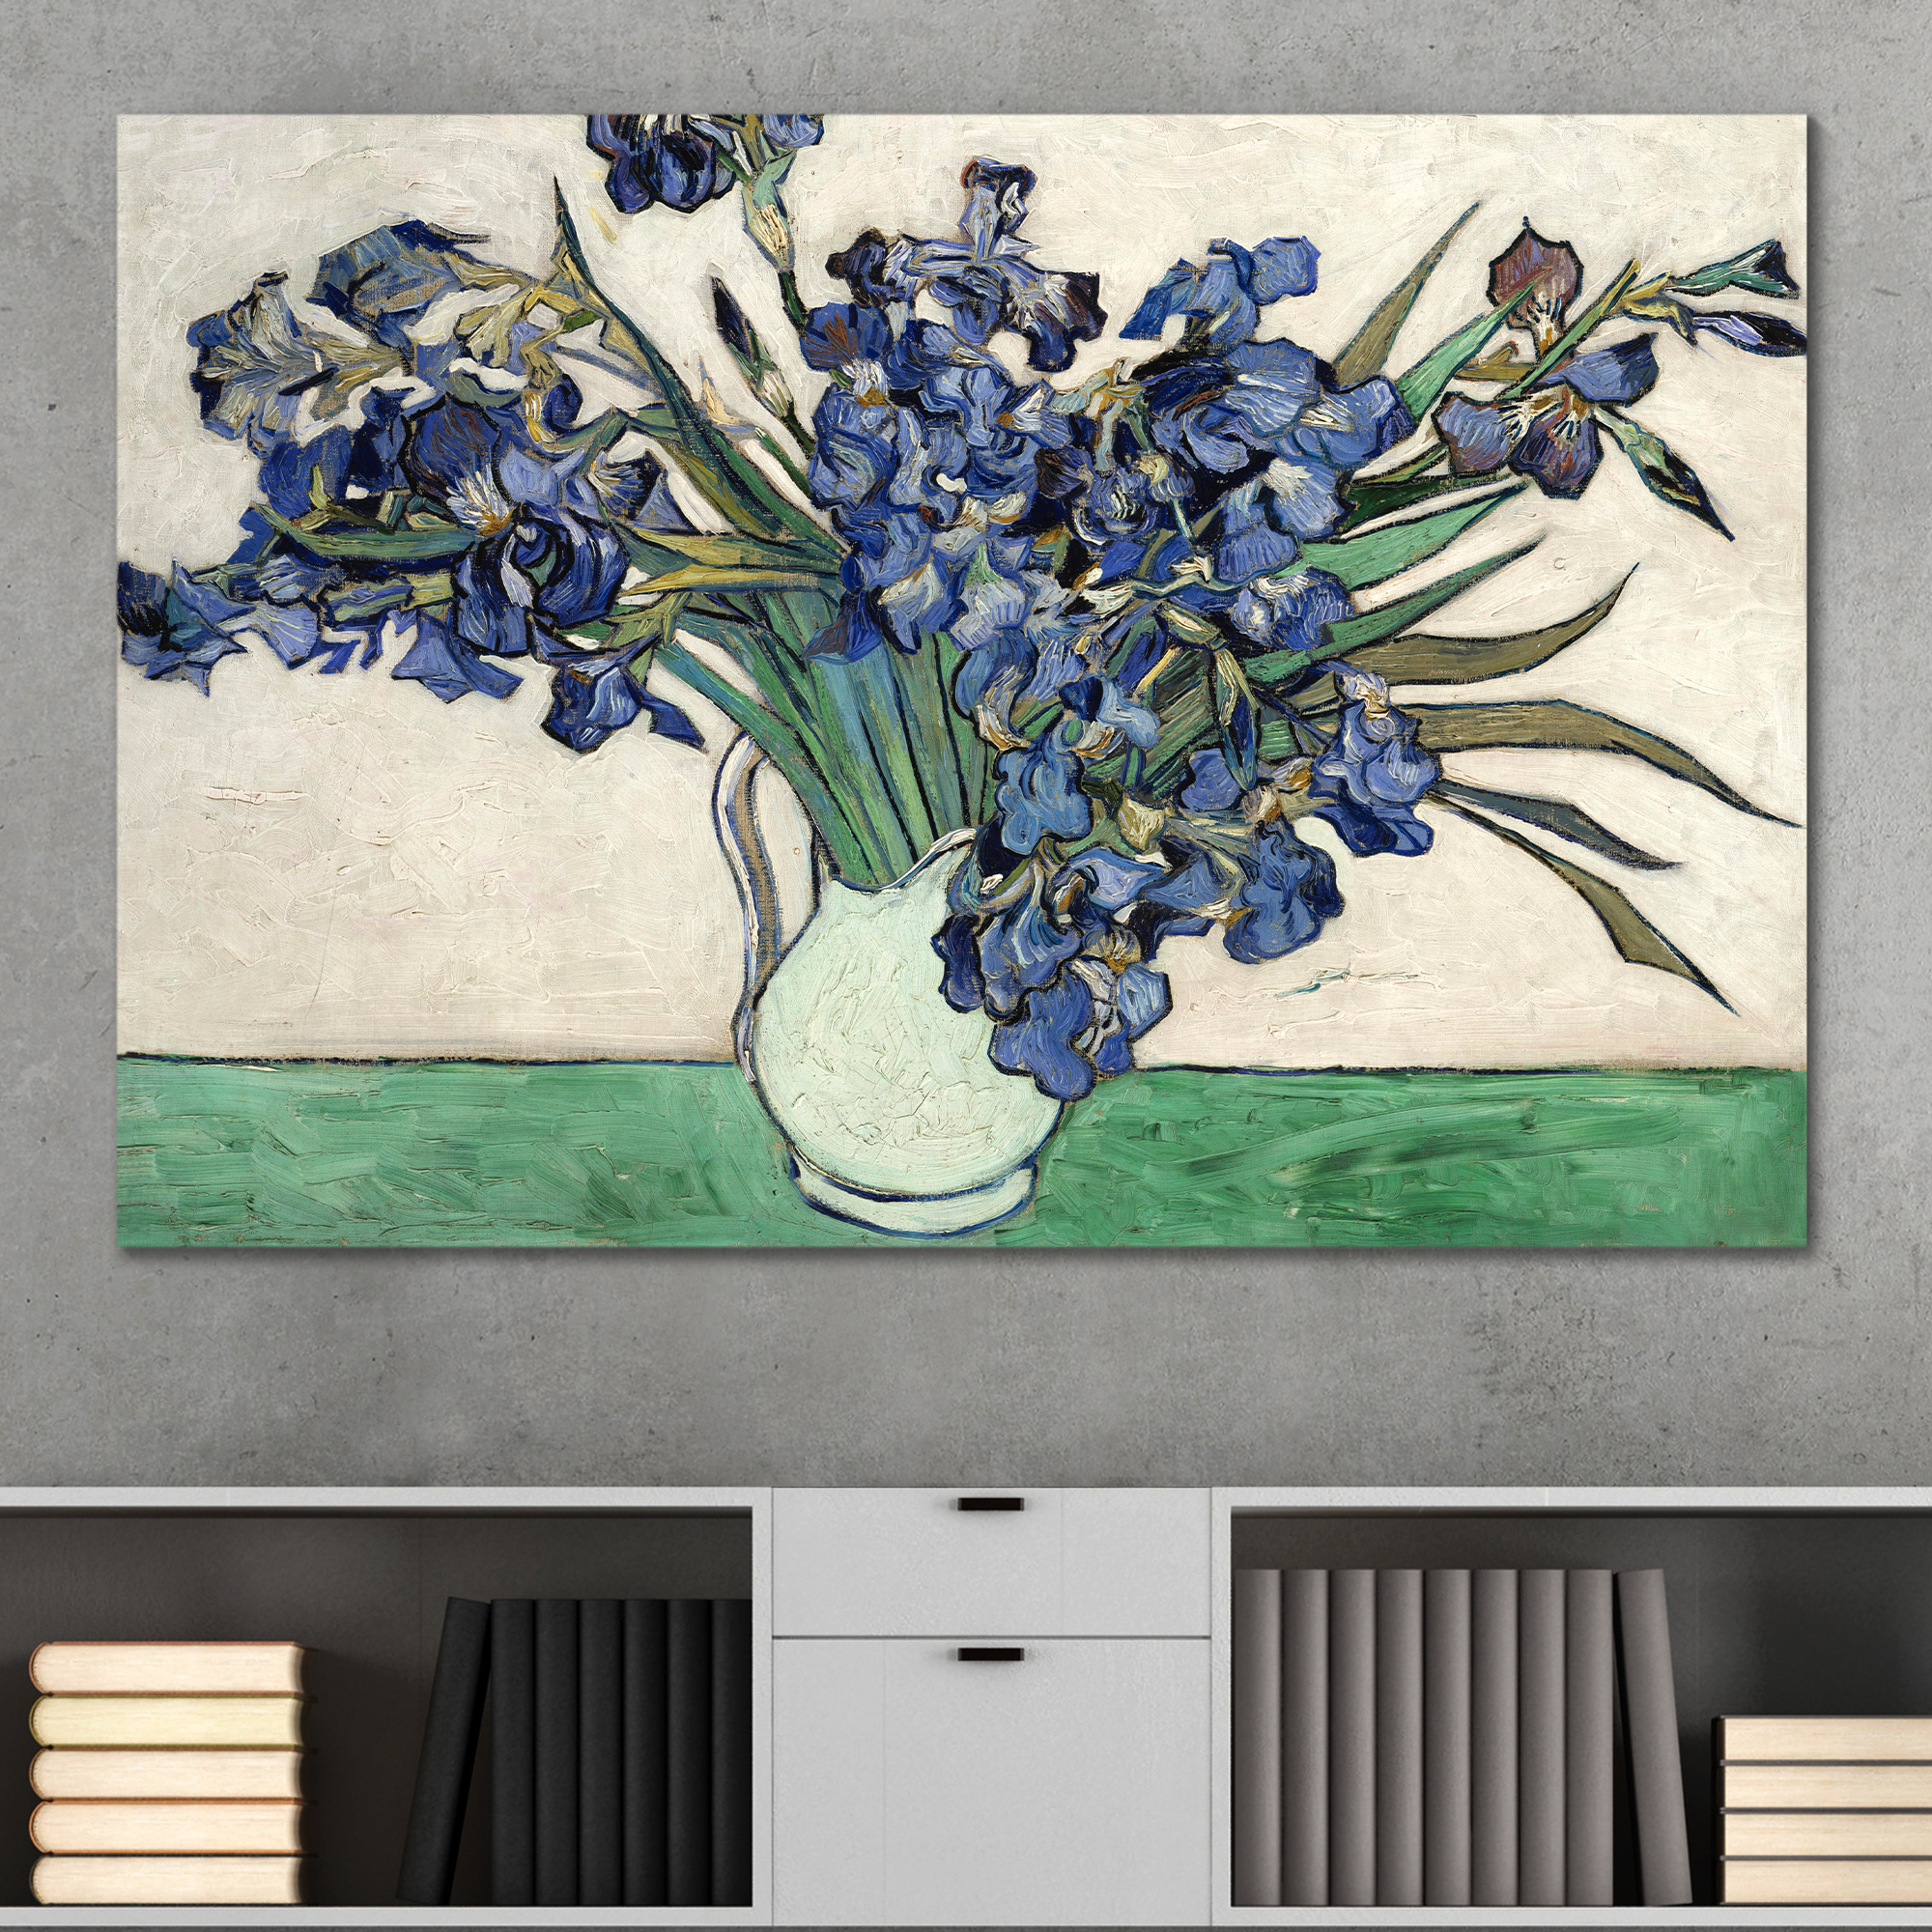 Irises in a Vase by Vincent Van Gogh - Oil Painting Reproduction on Canvas Prints Wall Art, Ready to Hang - 12x18 inches